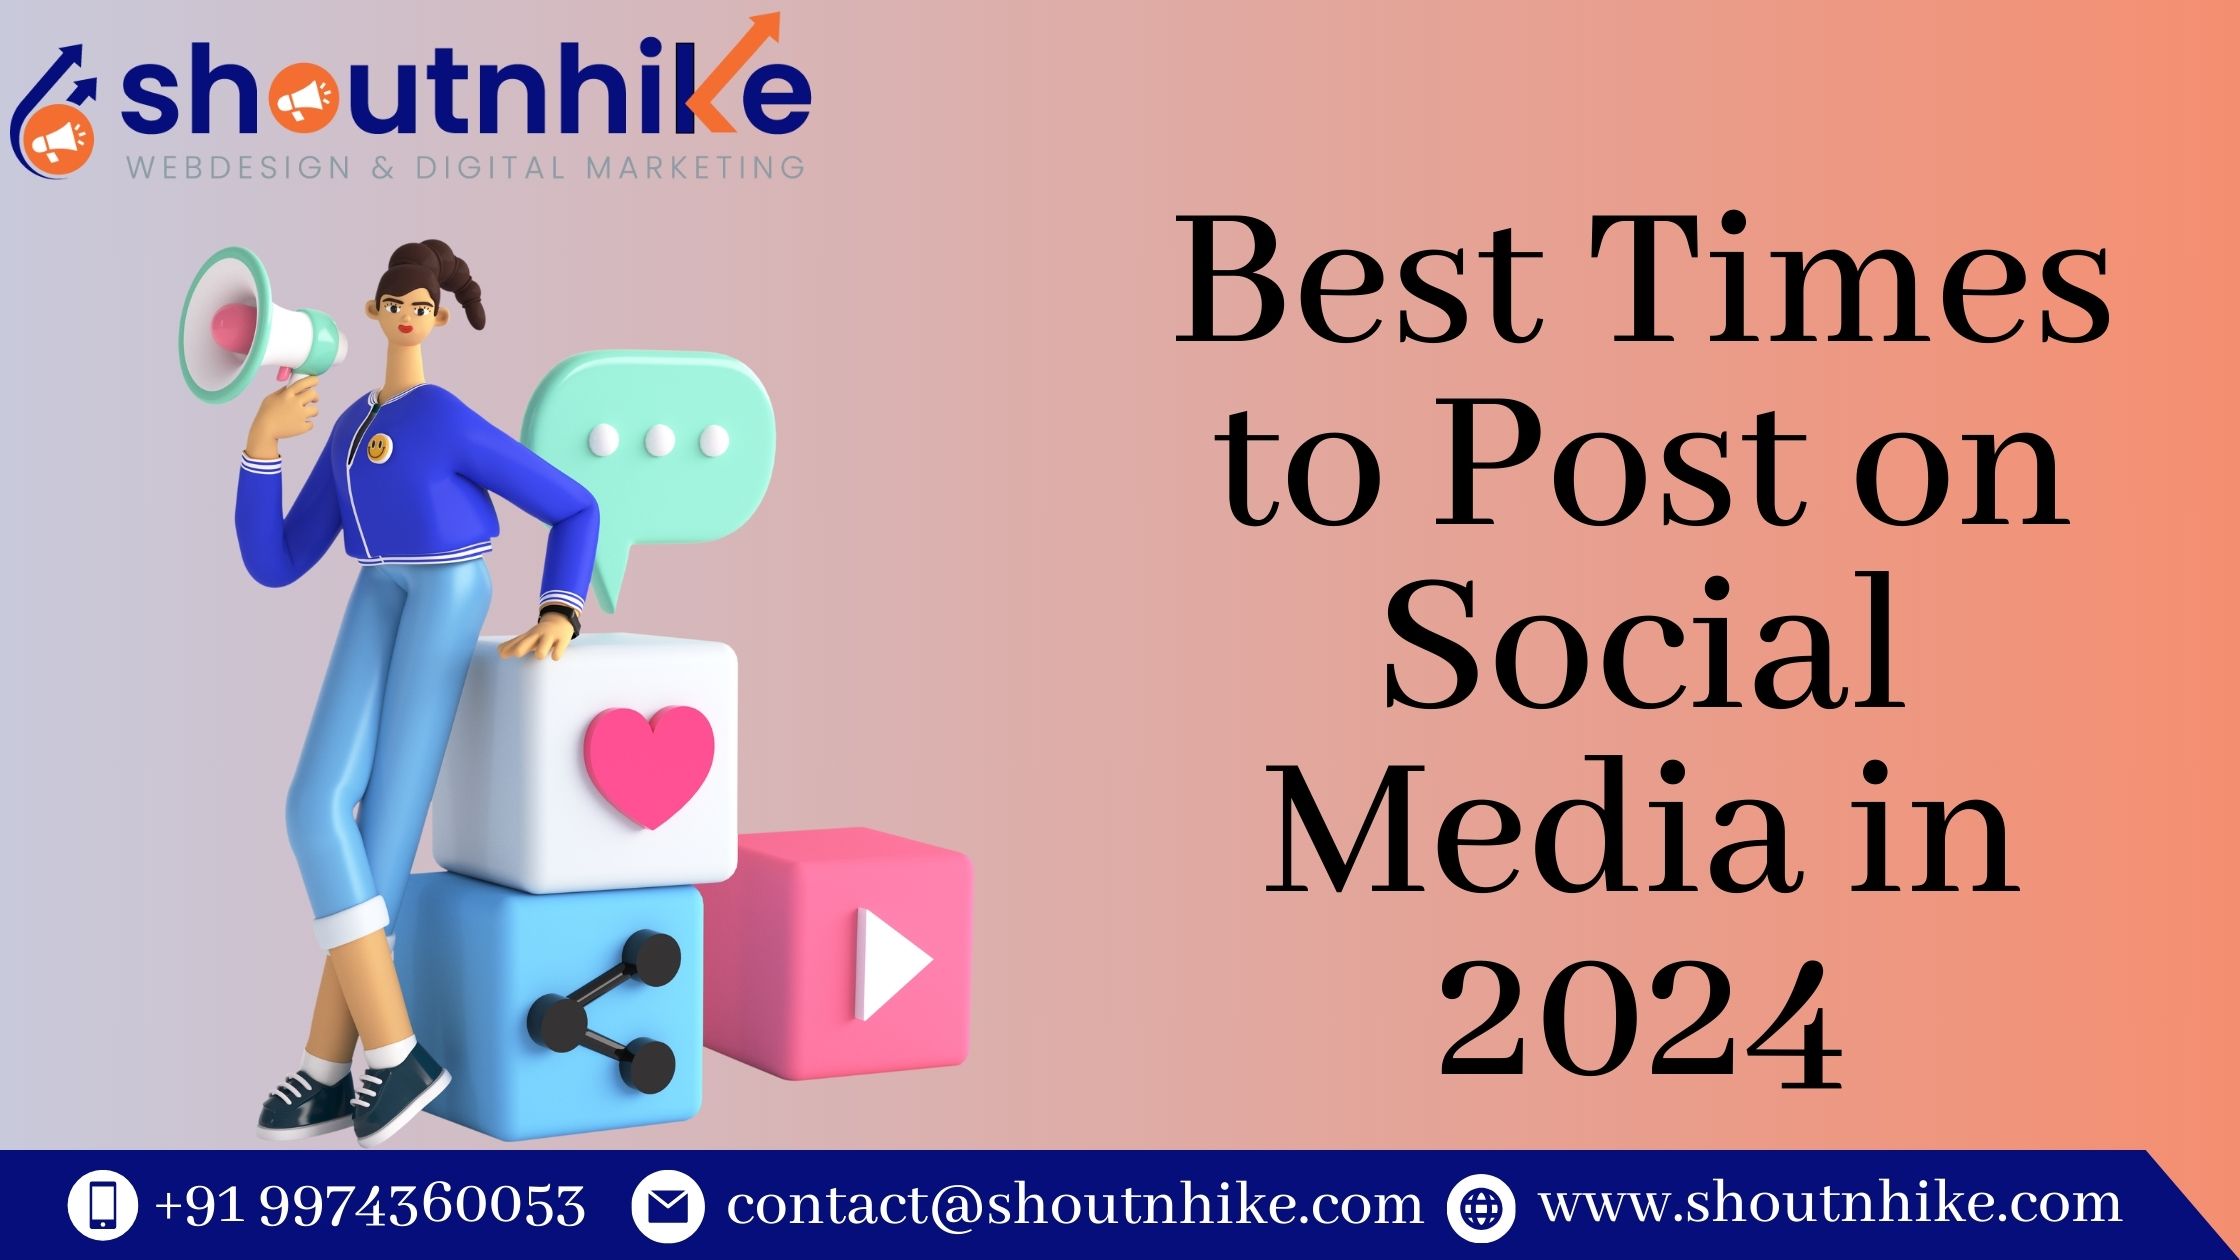 Best Times to Post on Social Media in 2024